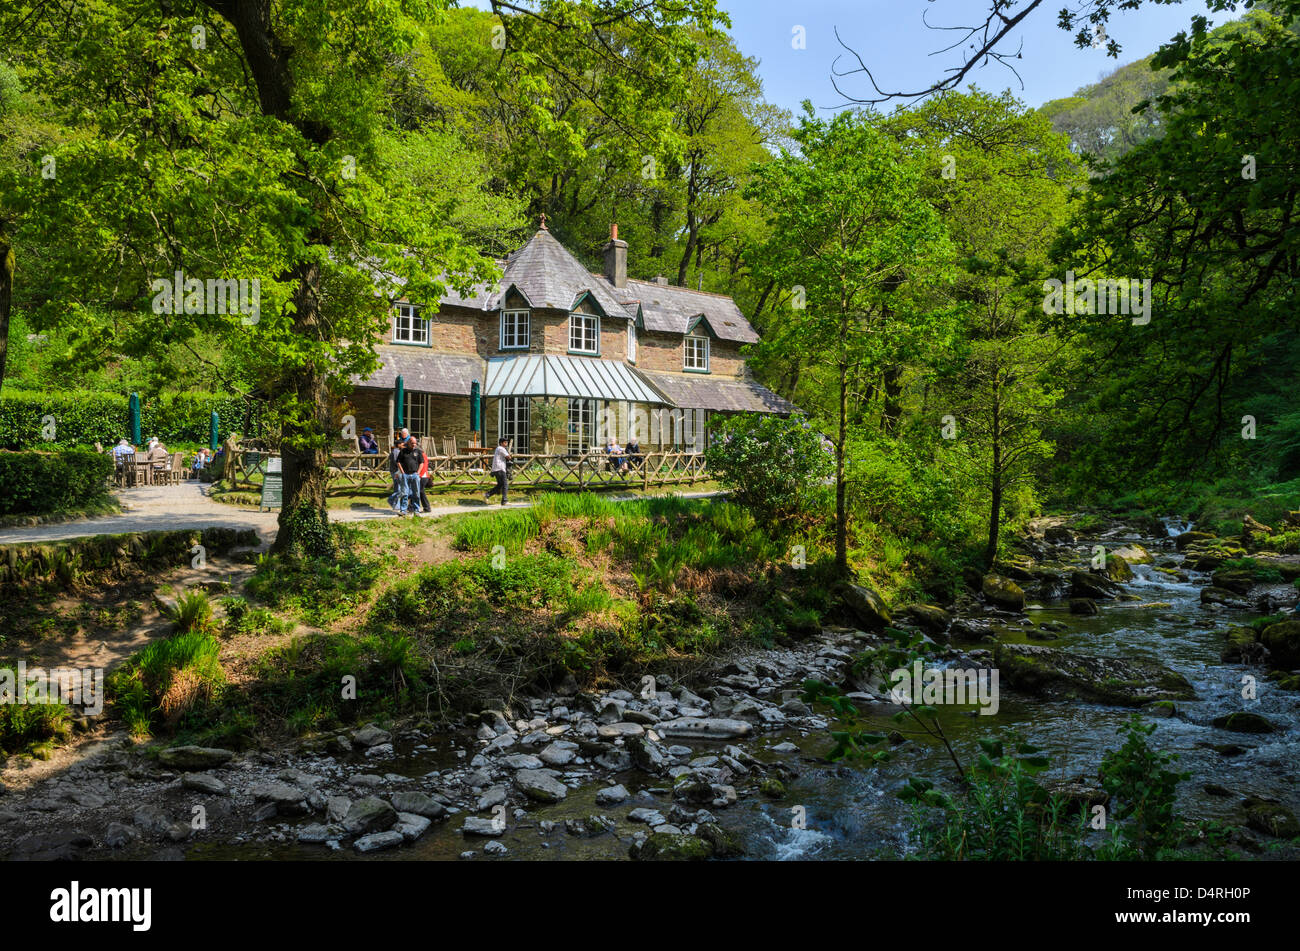 Watersmeet House tea room on the bank of the East Lyn River near Lynmouth, Devon, England. Stock Photo